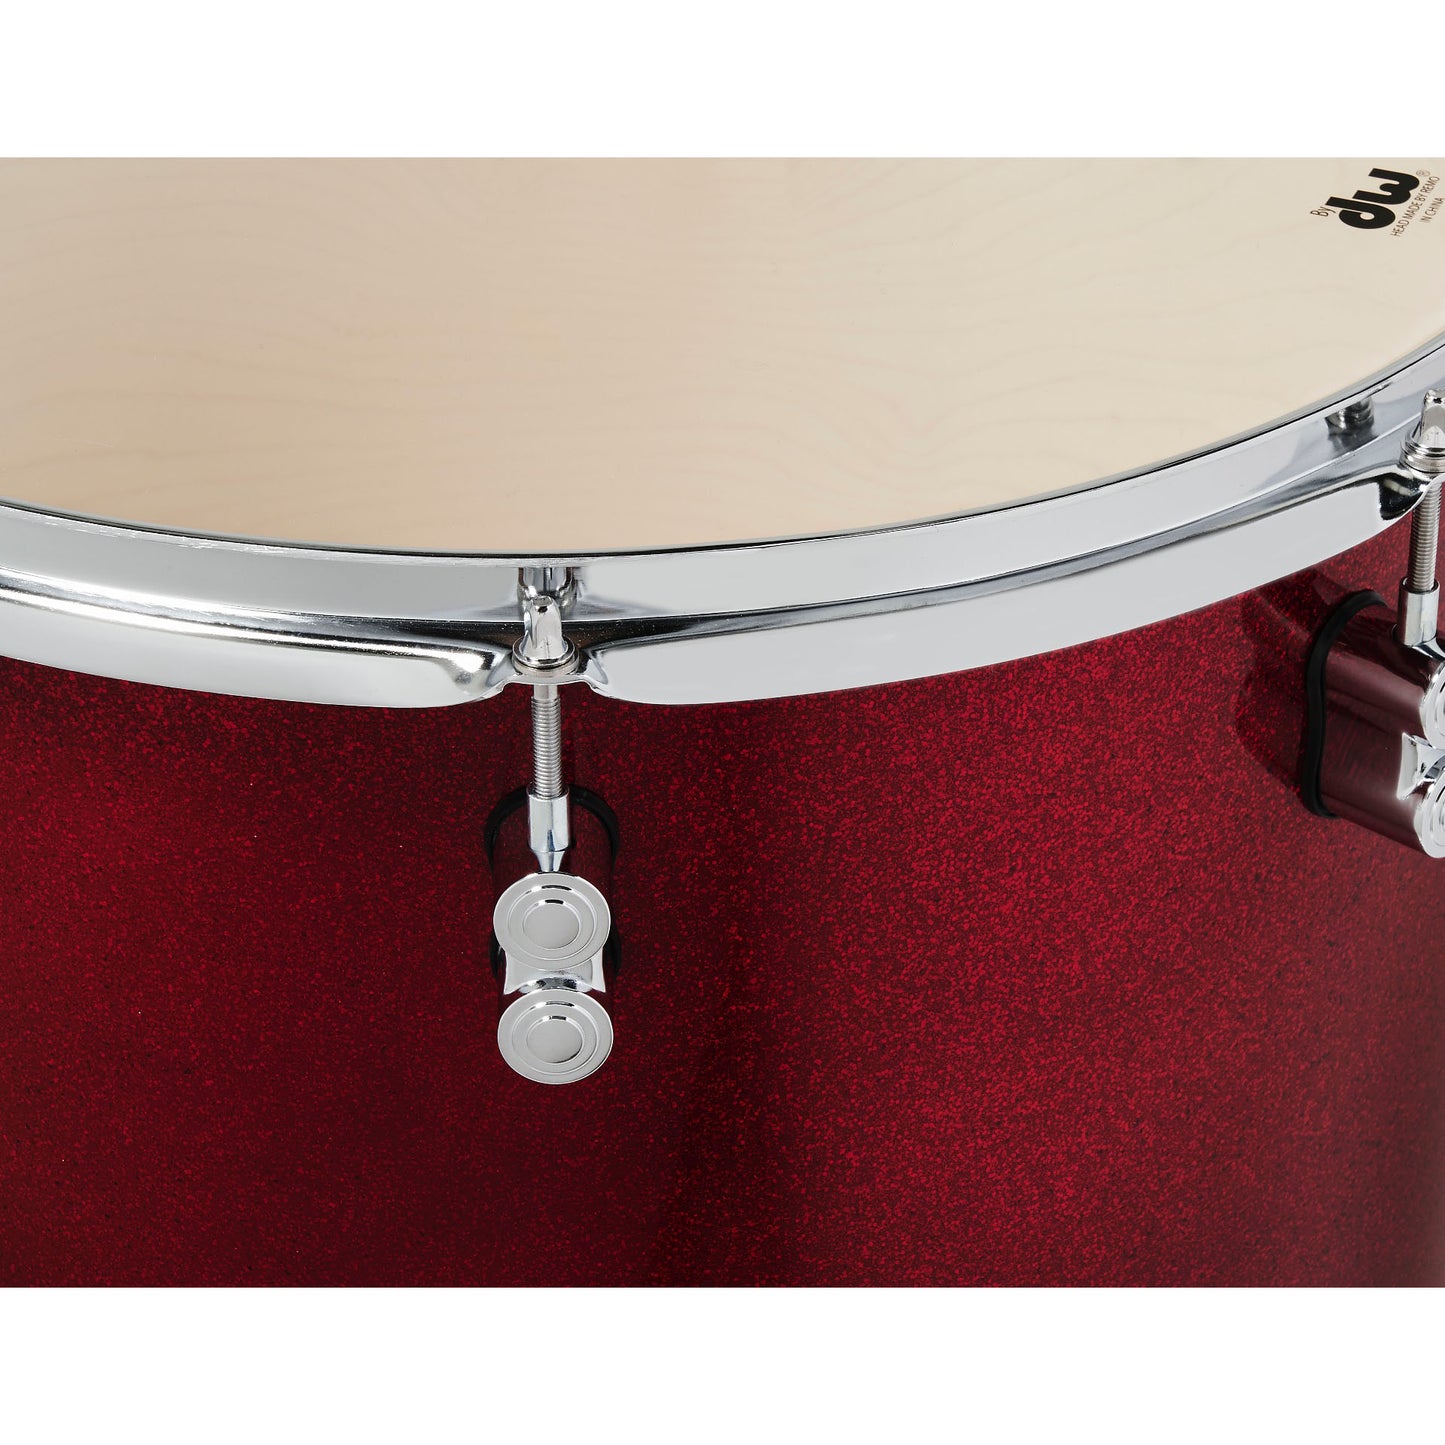 Pacific Drums & Percussion Concept Maple Bop Kit - Red to Satin Black